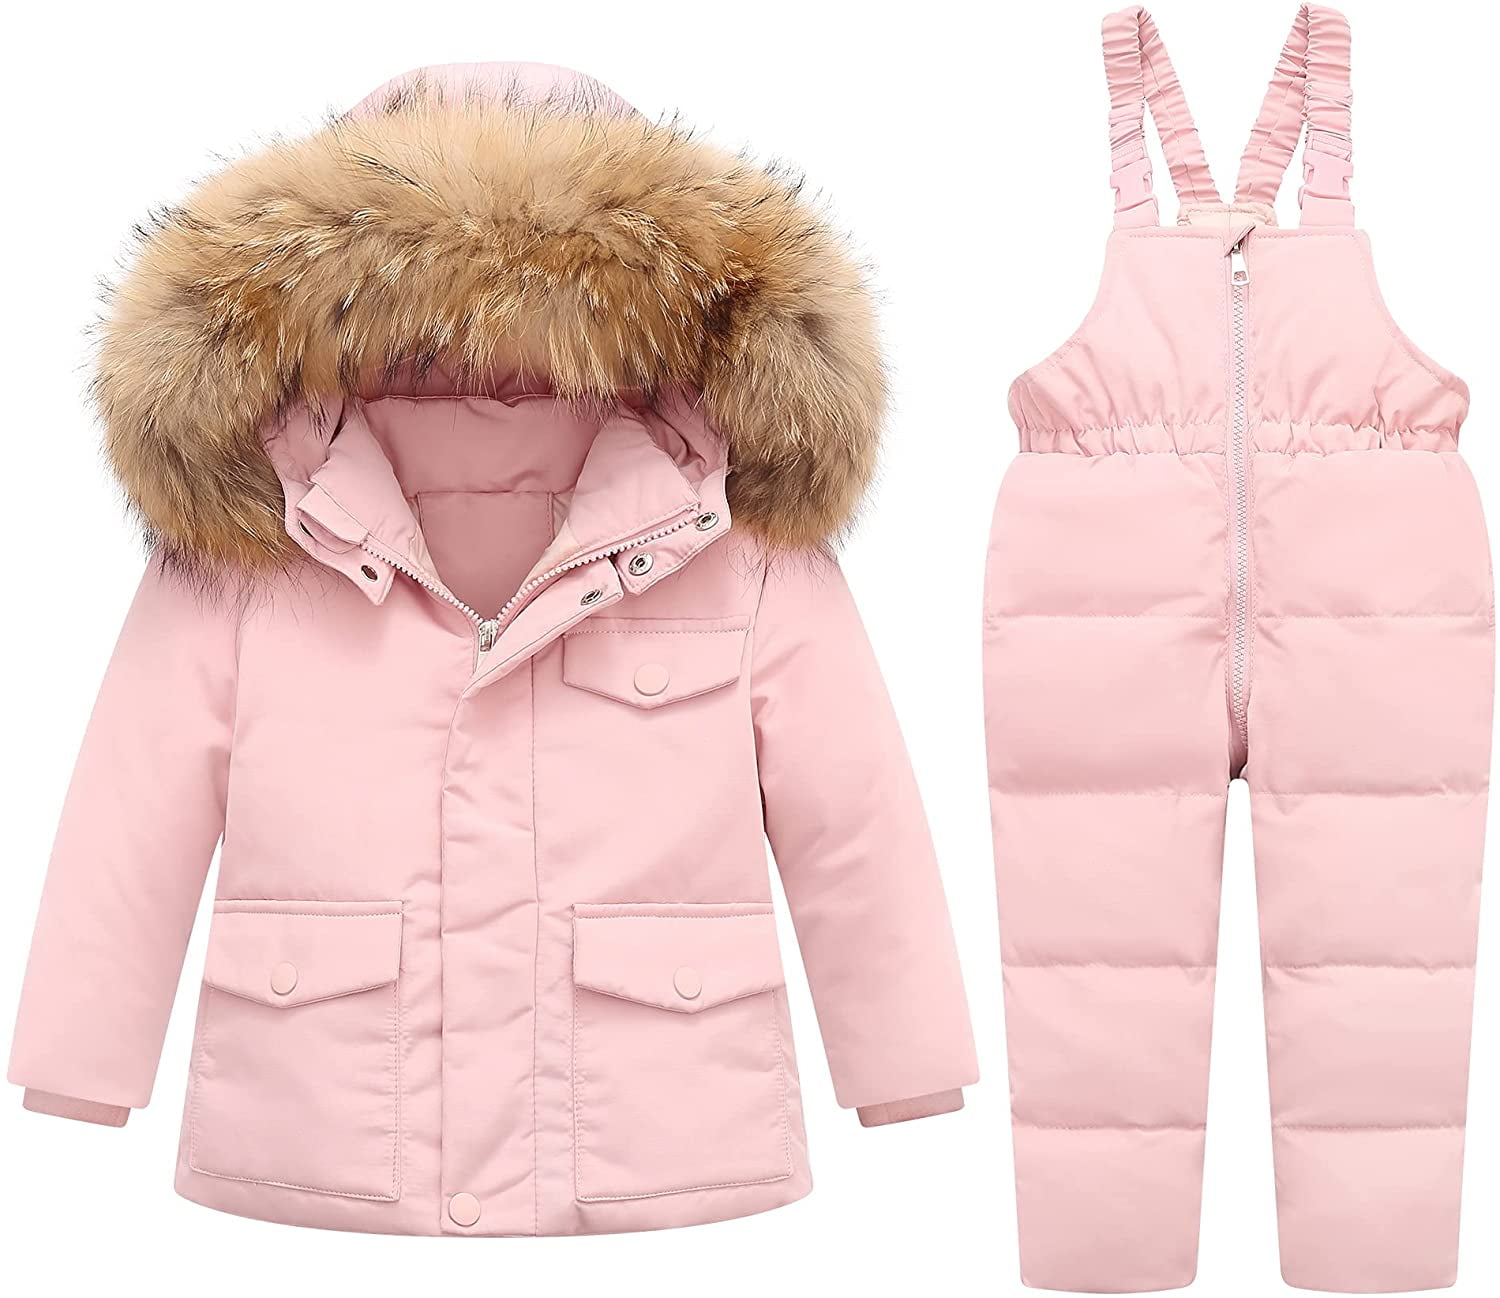 Toddler Girls Boys Winter Thick Warm Hooded Down Coat Jumpsuit Snowsuit 2Sets 